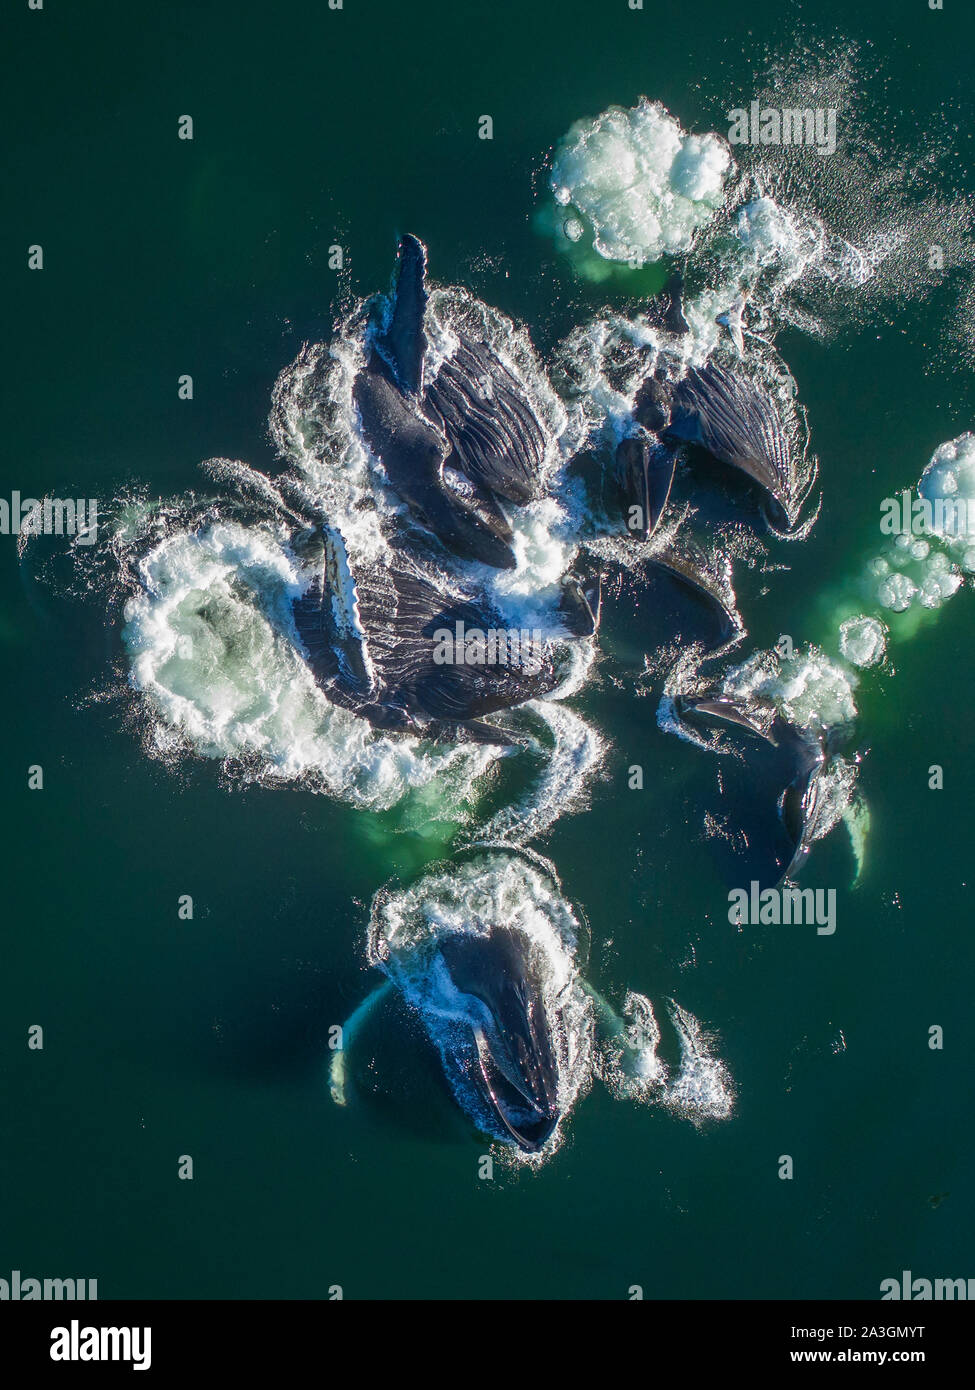 USA, Alaska, Aerial view of Humpback Whales (Megaptera novaeangliae) lunging at surface of Frederick Sound while bubble net feeding on herring shoal o Stock Photo